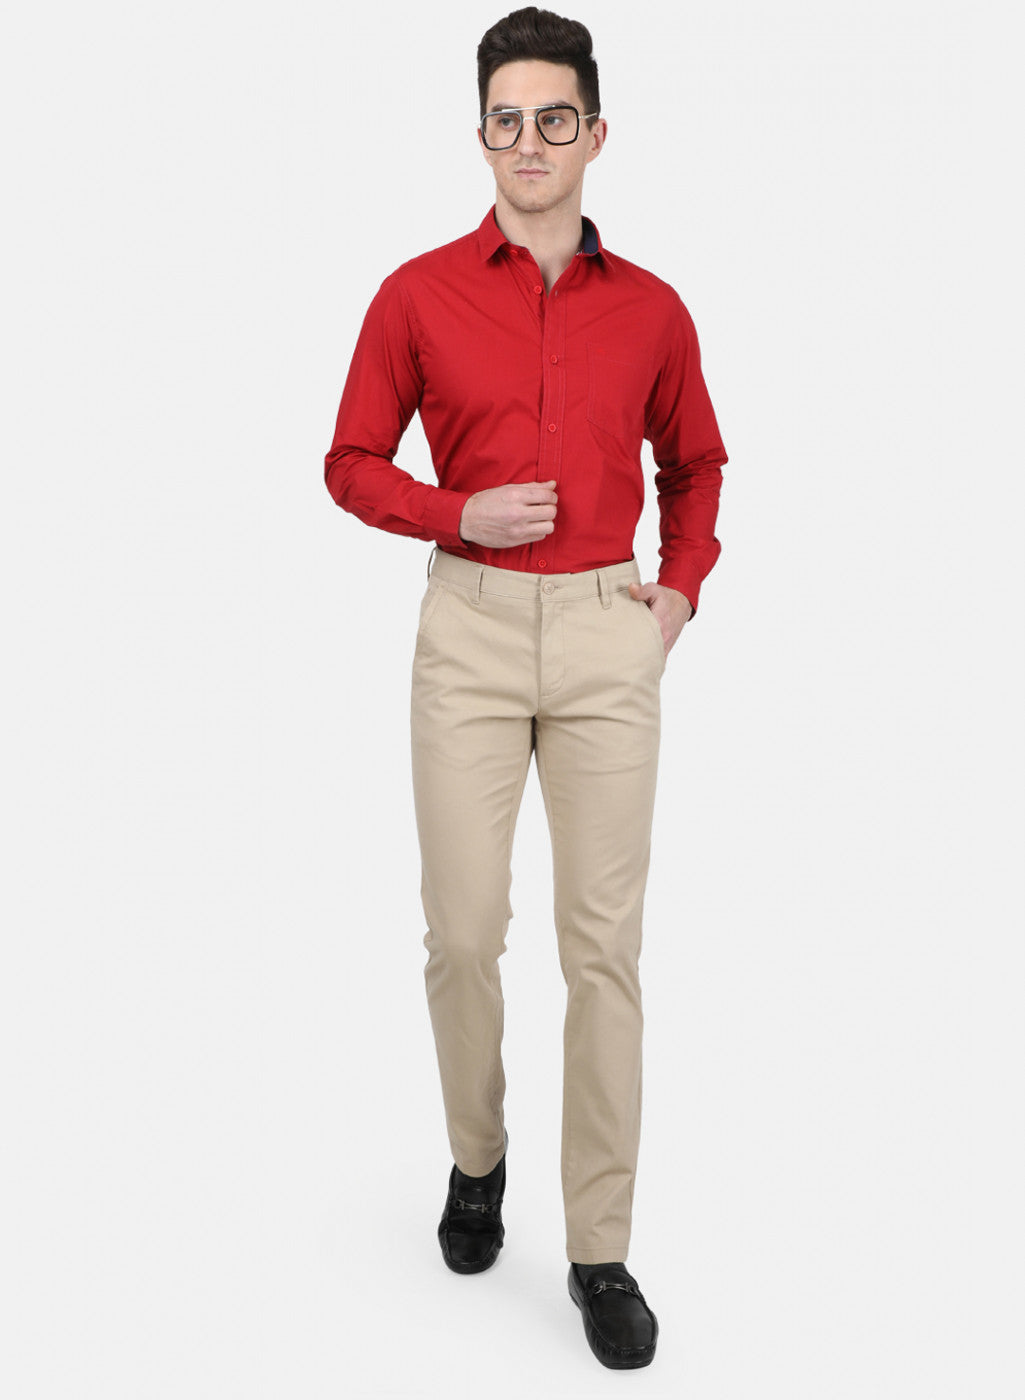 Mens Red Solid Shirt